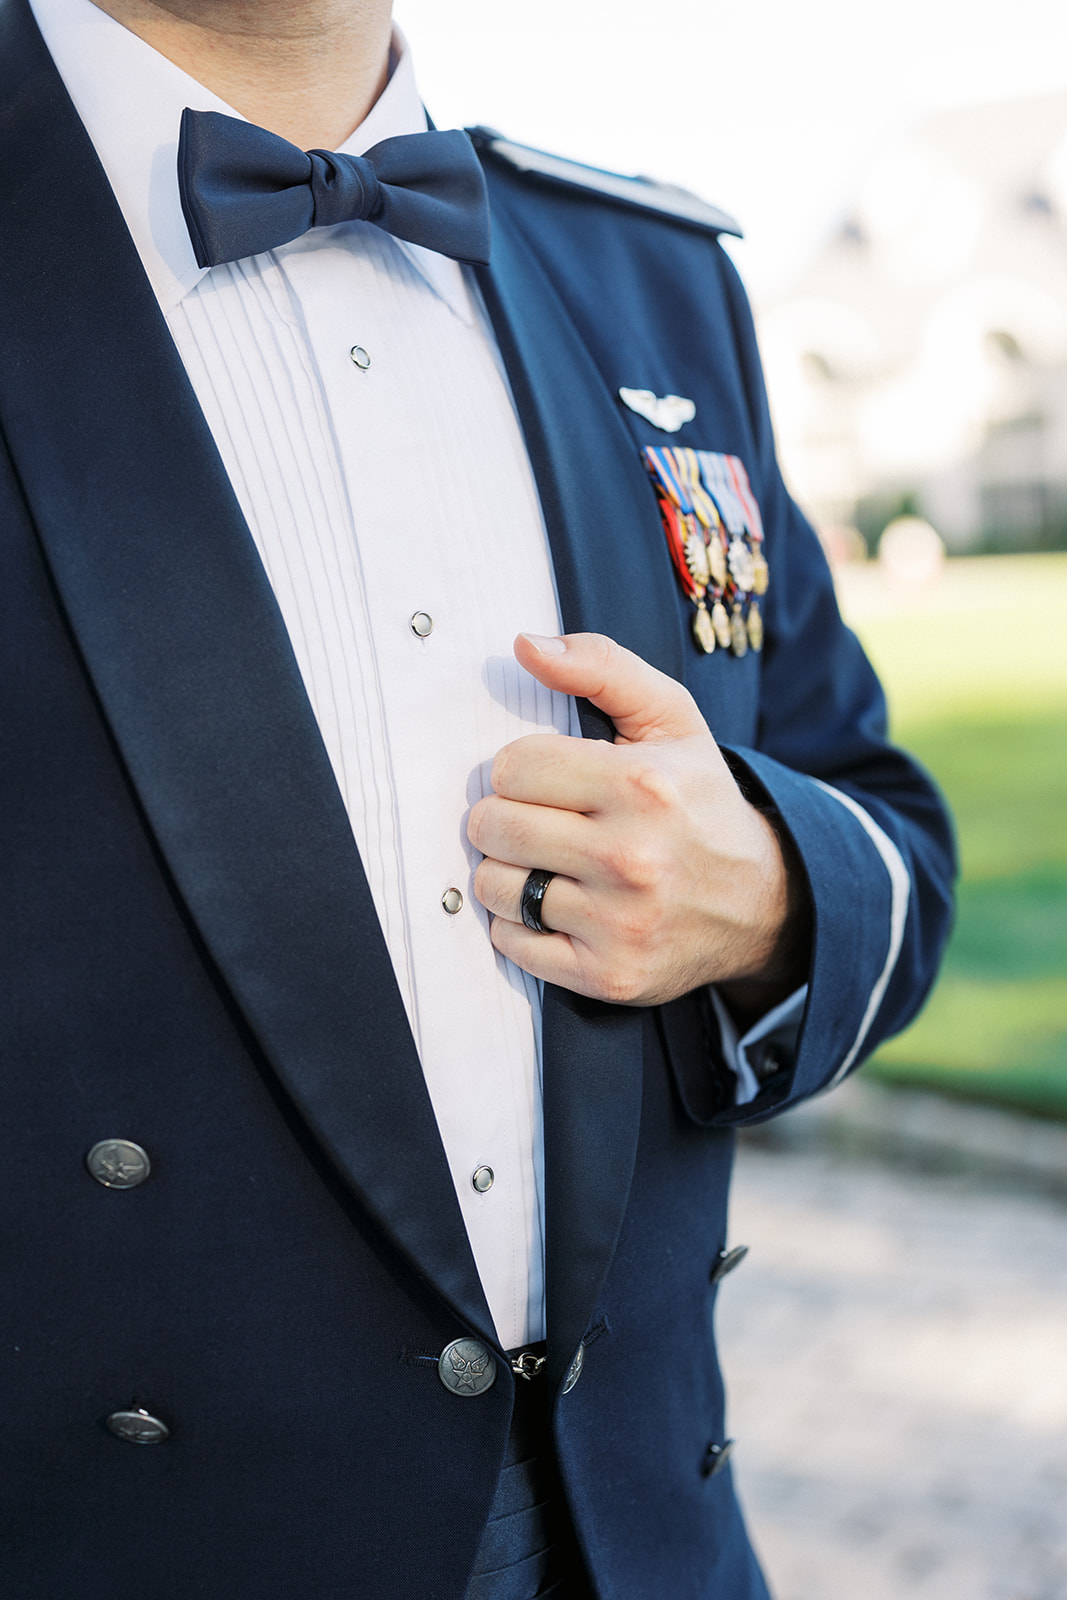 Details of a groom's decorated pilot's jacket as he holds the lapel with his ring hand at The Tides Estate Wedding venue